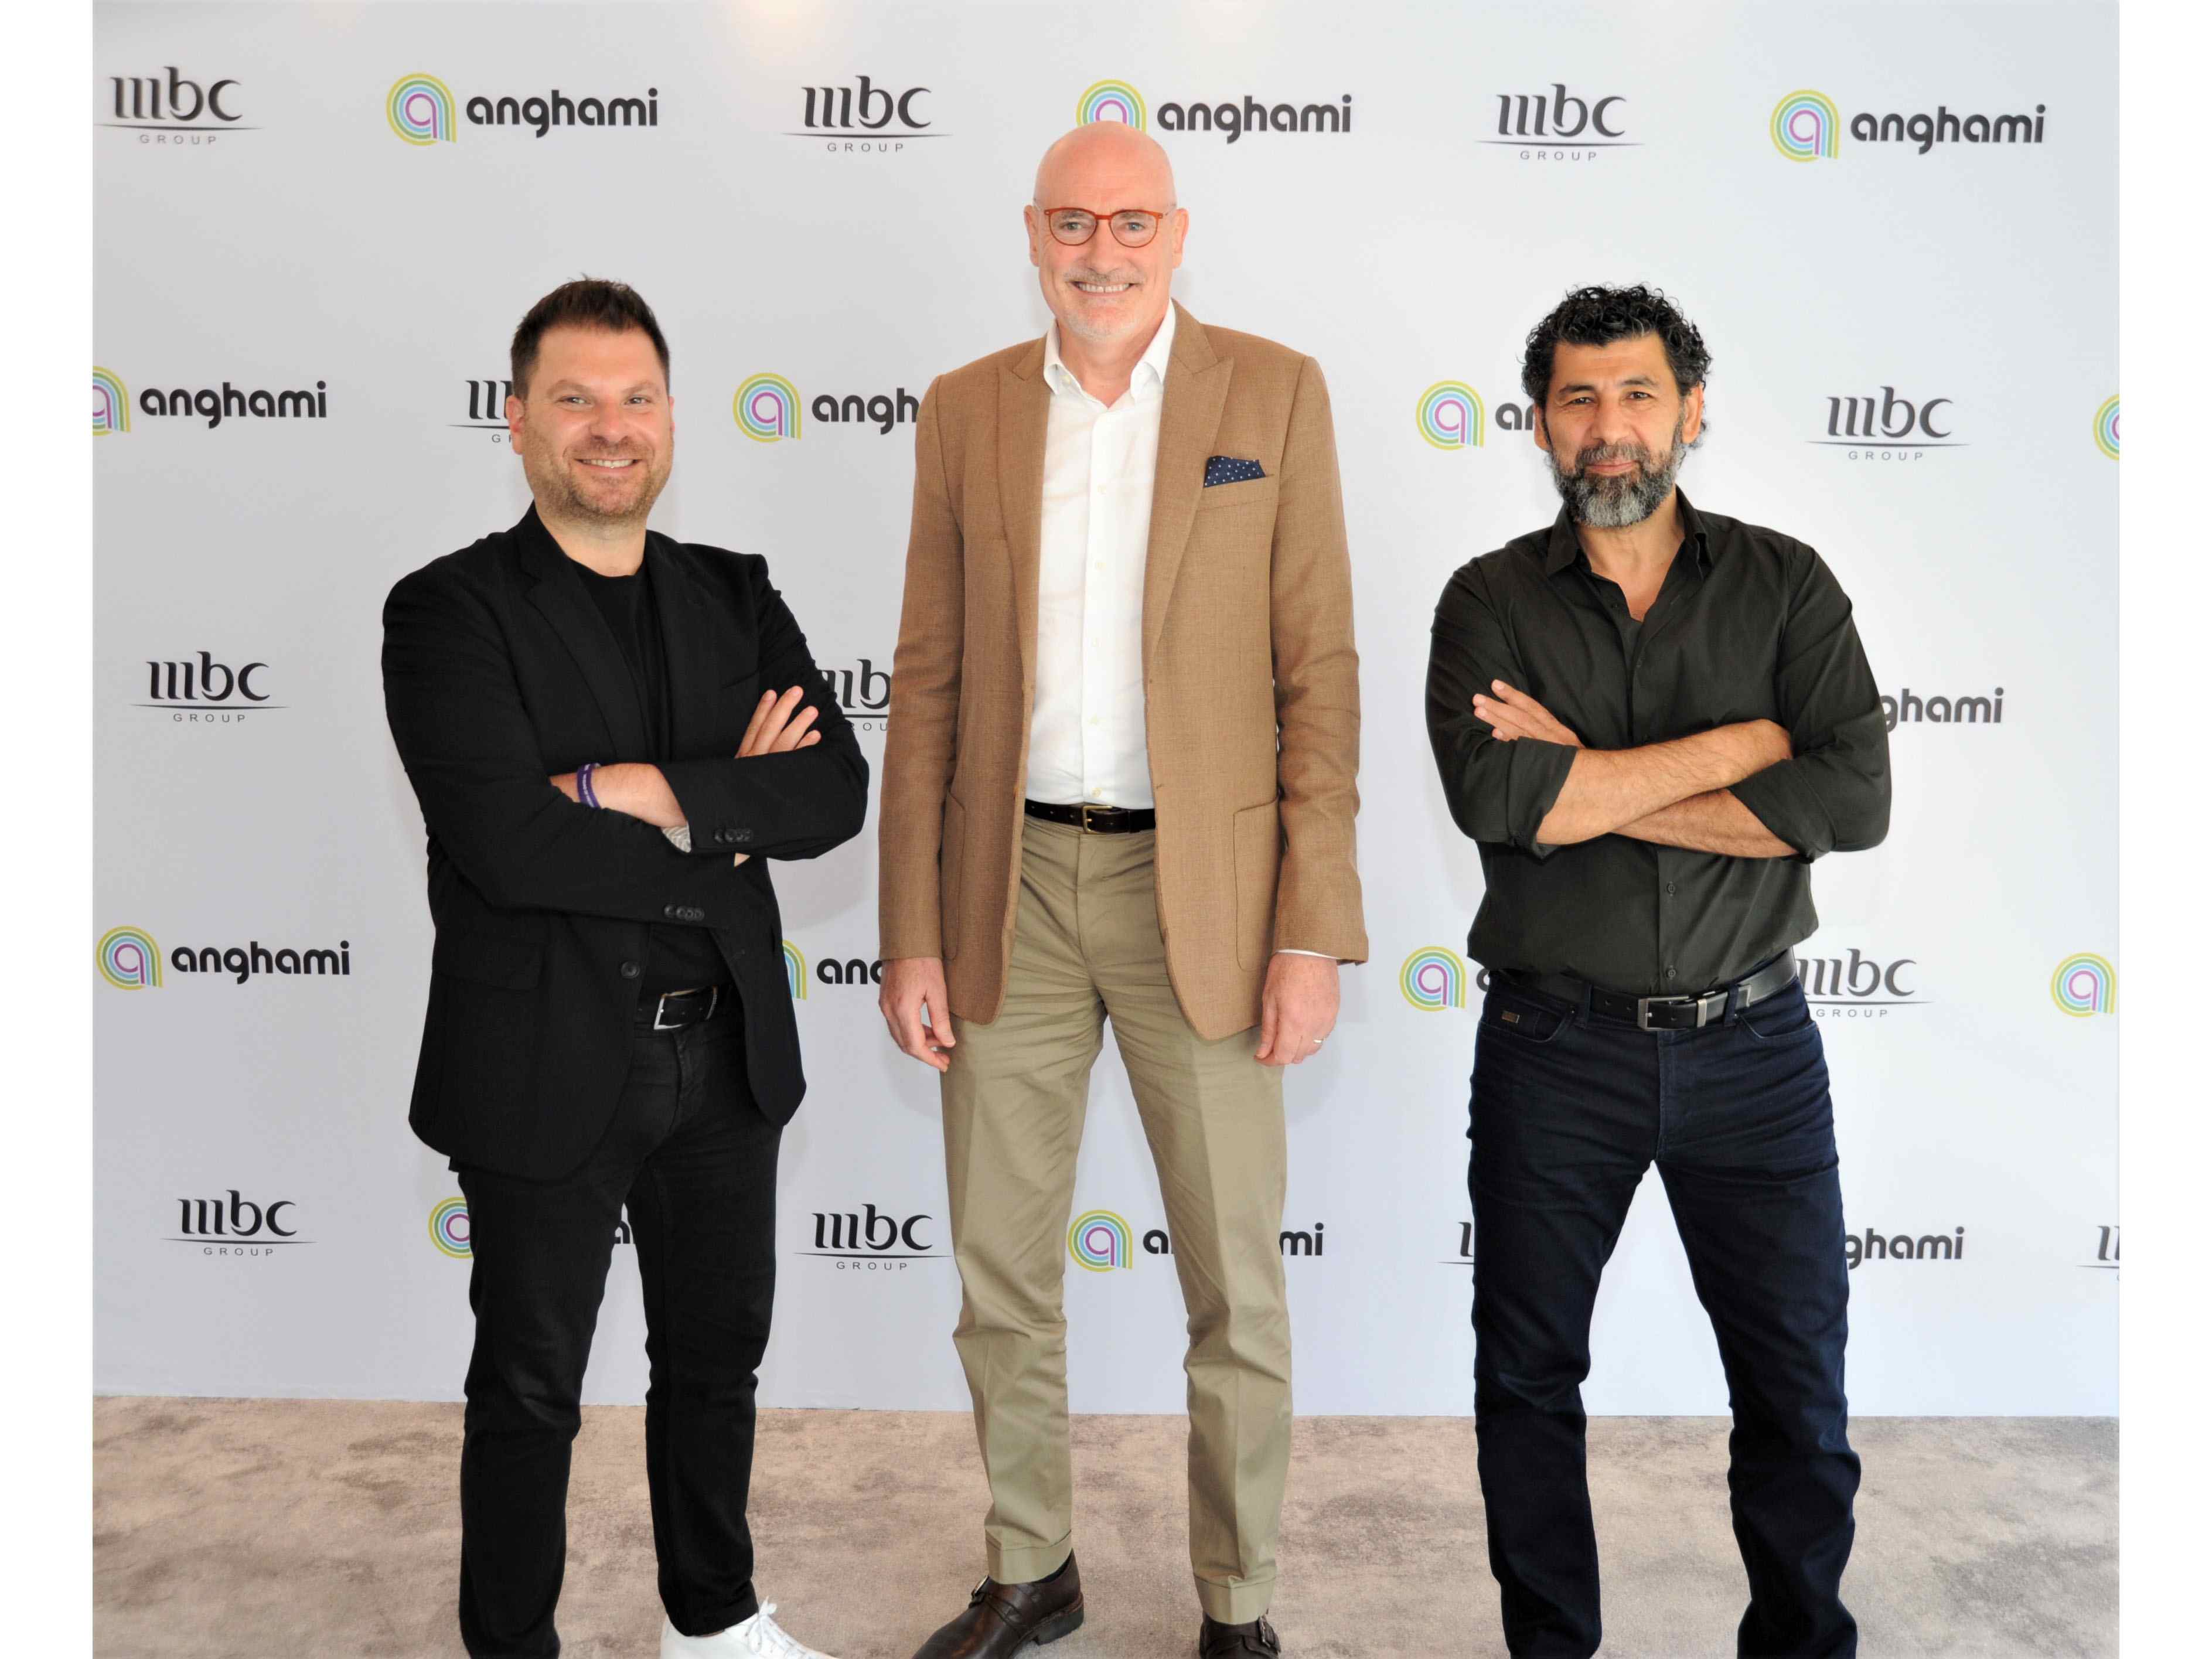 MBC GROUP and Anghami renew their marketing agreement 